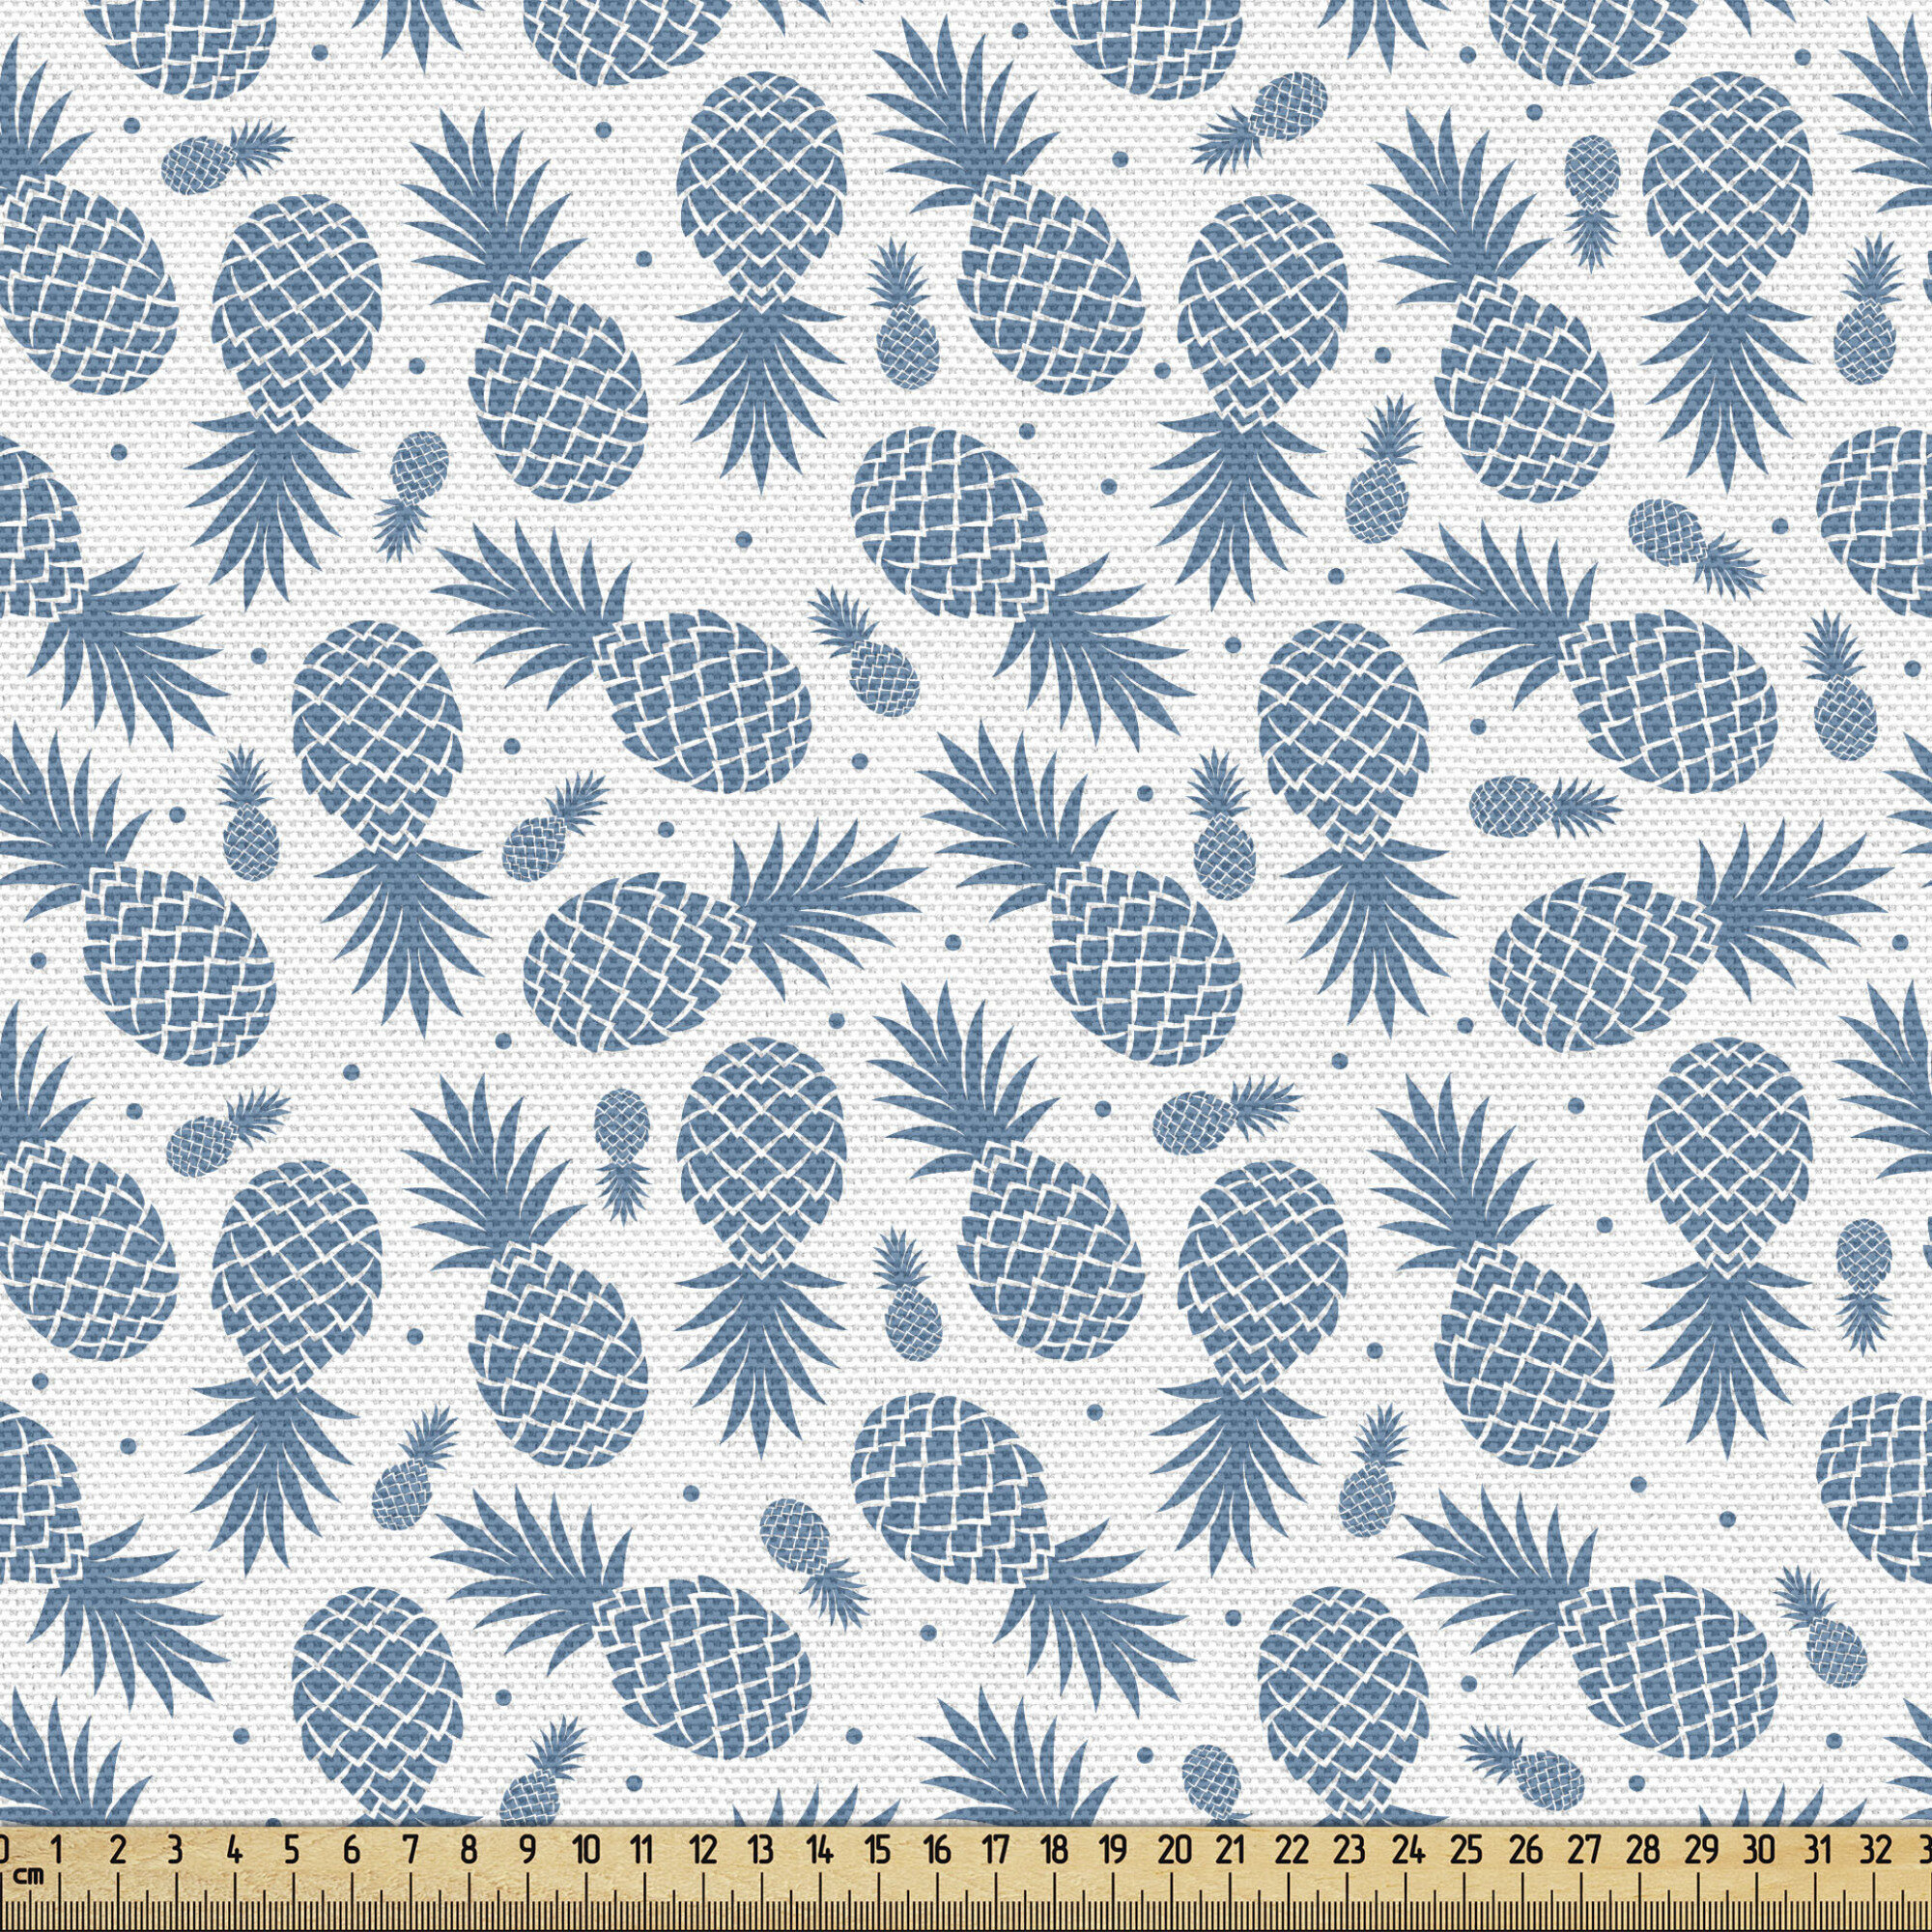 Upholstery Curtains Cushions & Crafts Art Deco Tropical Pineapples Fabric 